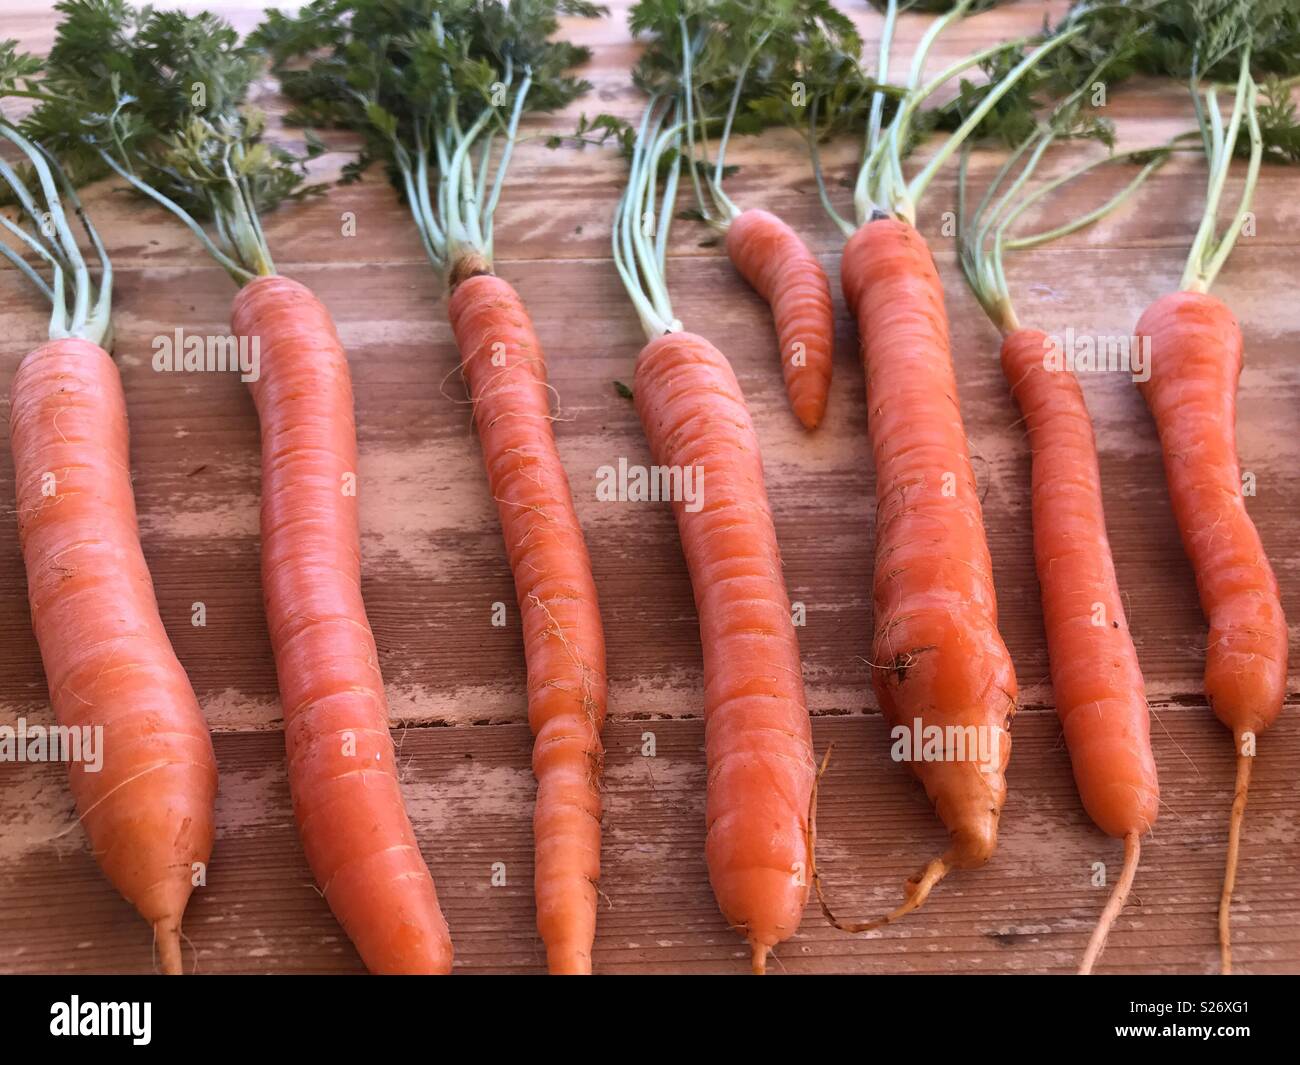 Fresh produce, organic carrots with carrot greens, high angle view Stock Photo